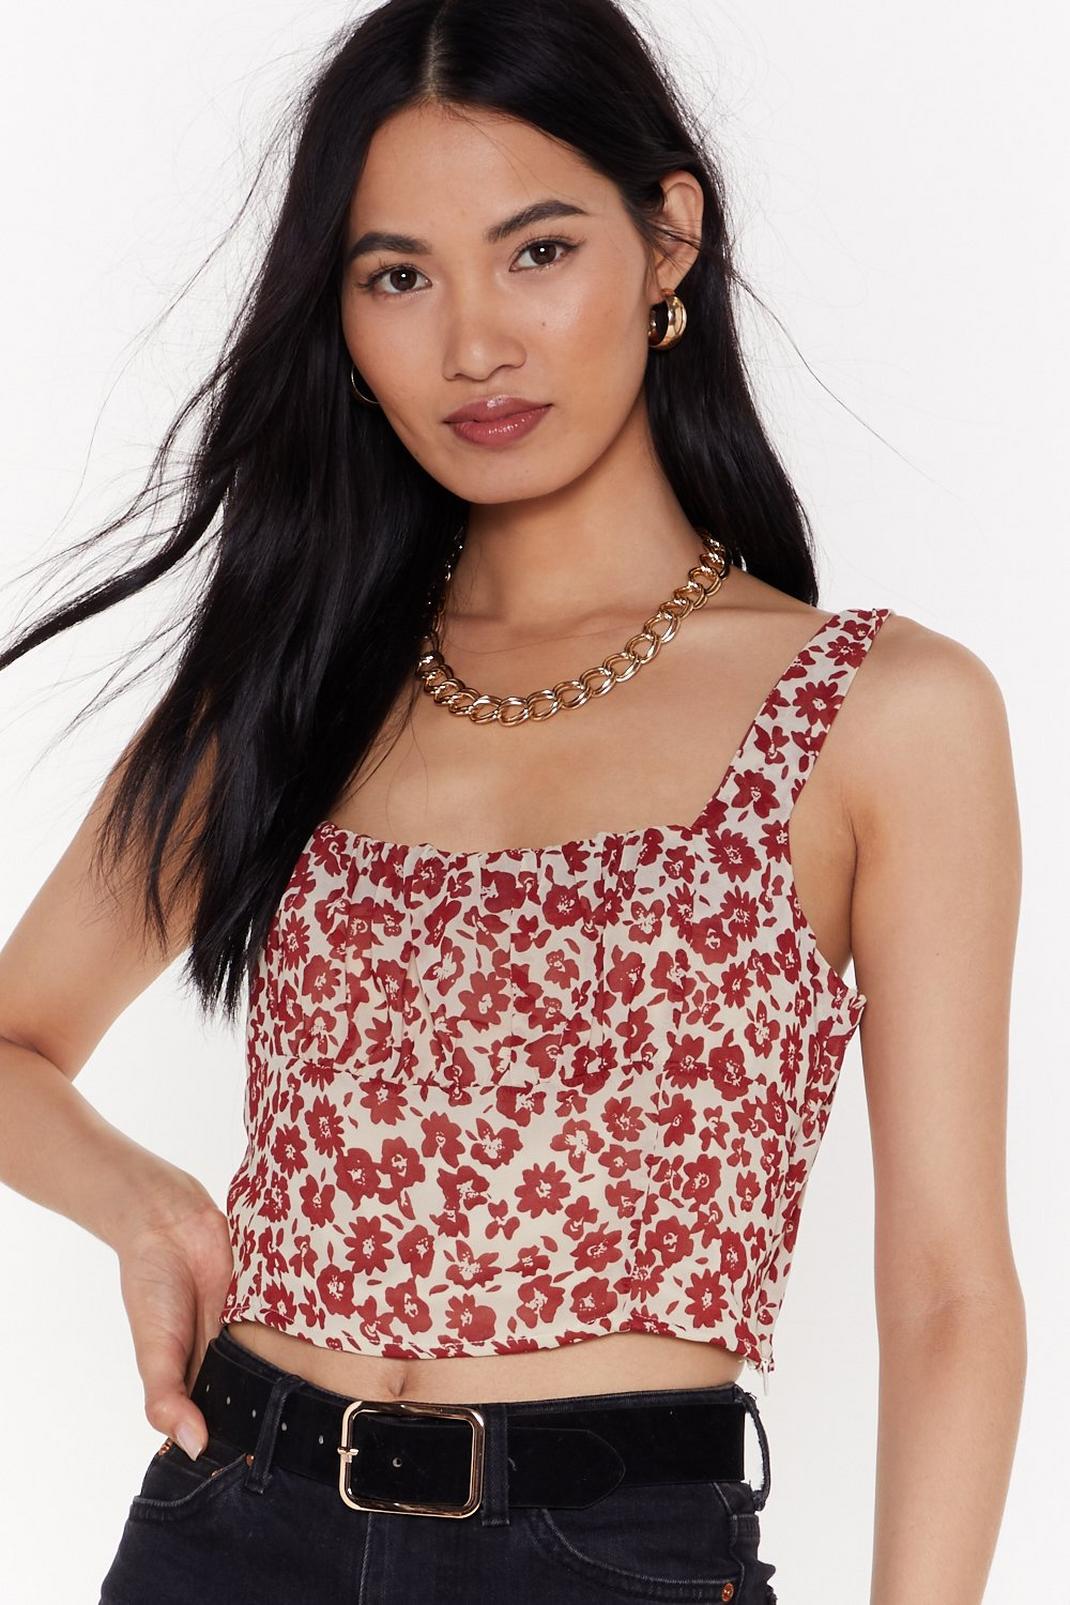 Counting Down the Flowers Floral Crop Top image number 1